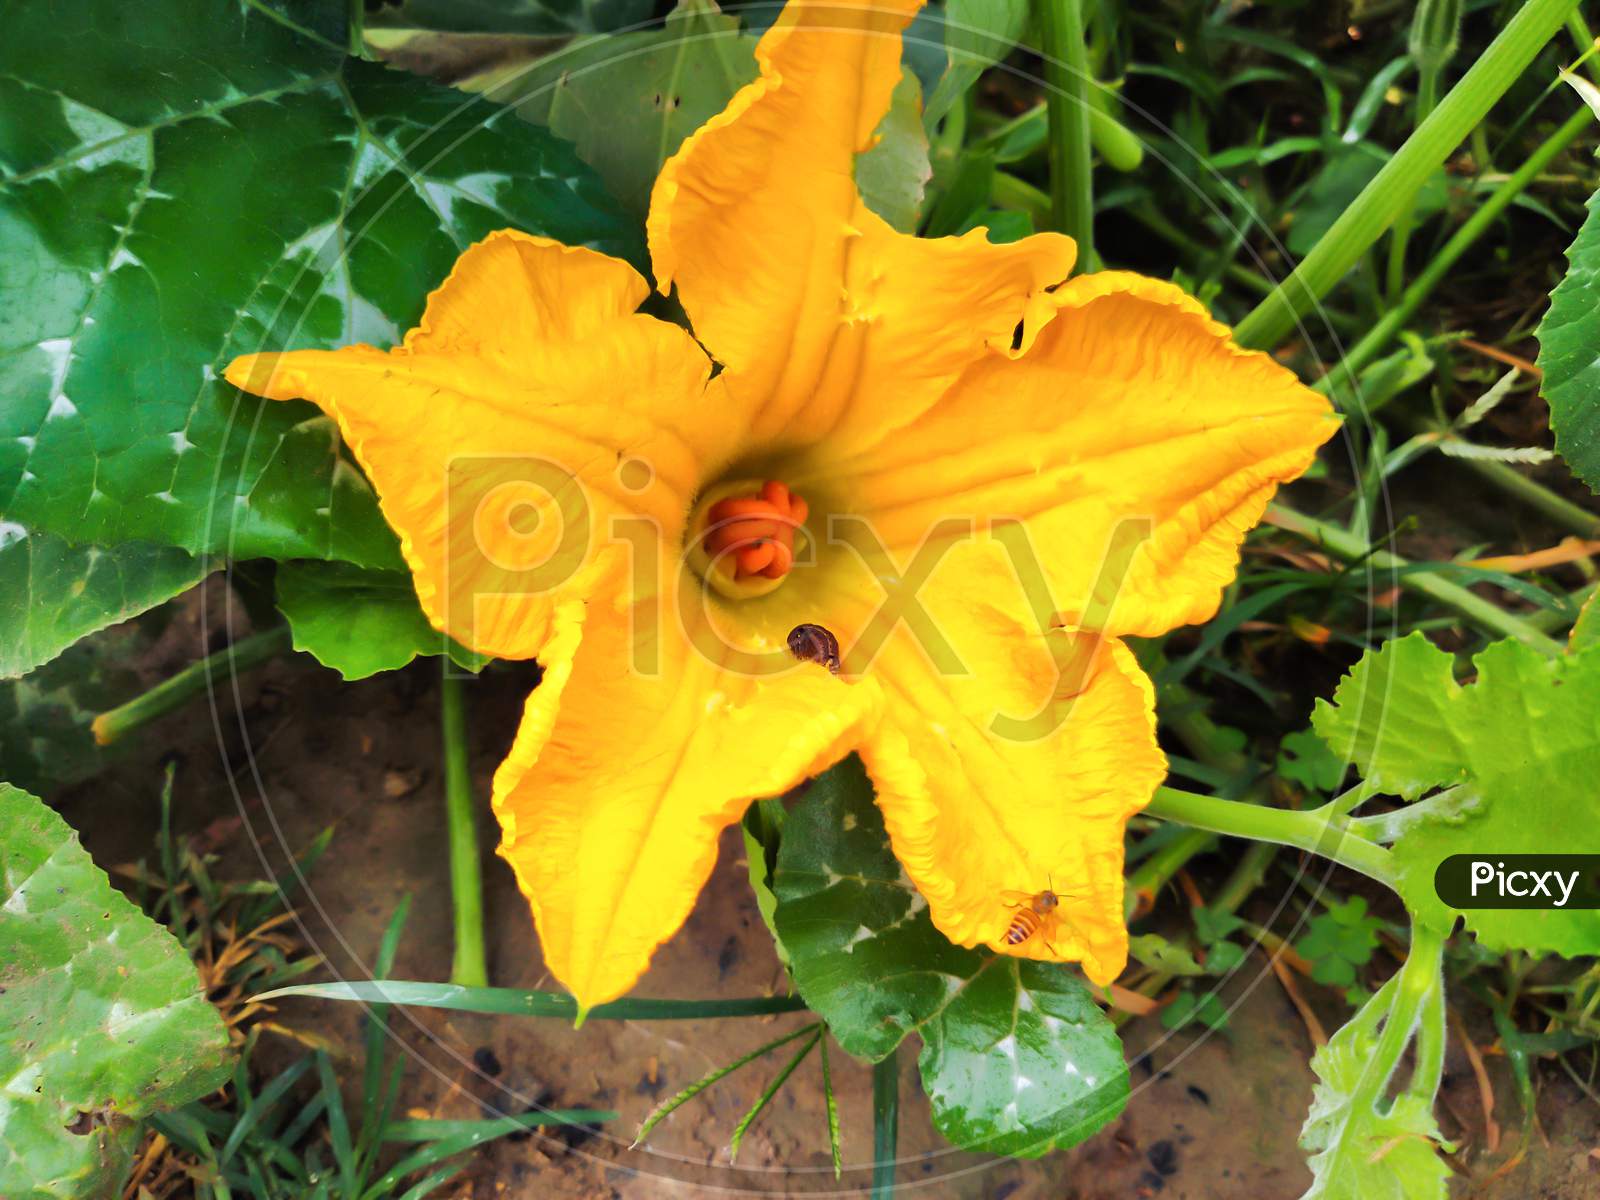 Caterpillar Insect And Bee On The Pumpkin Flowers - Selective Focus